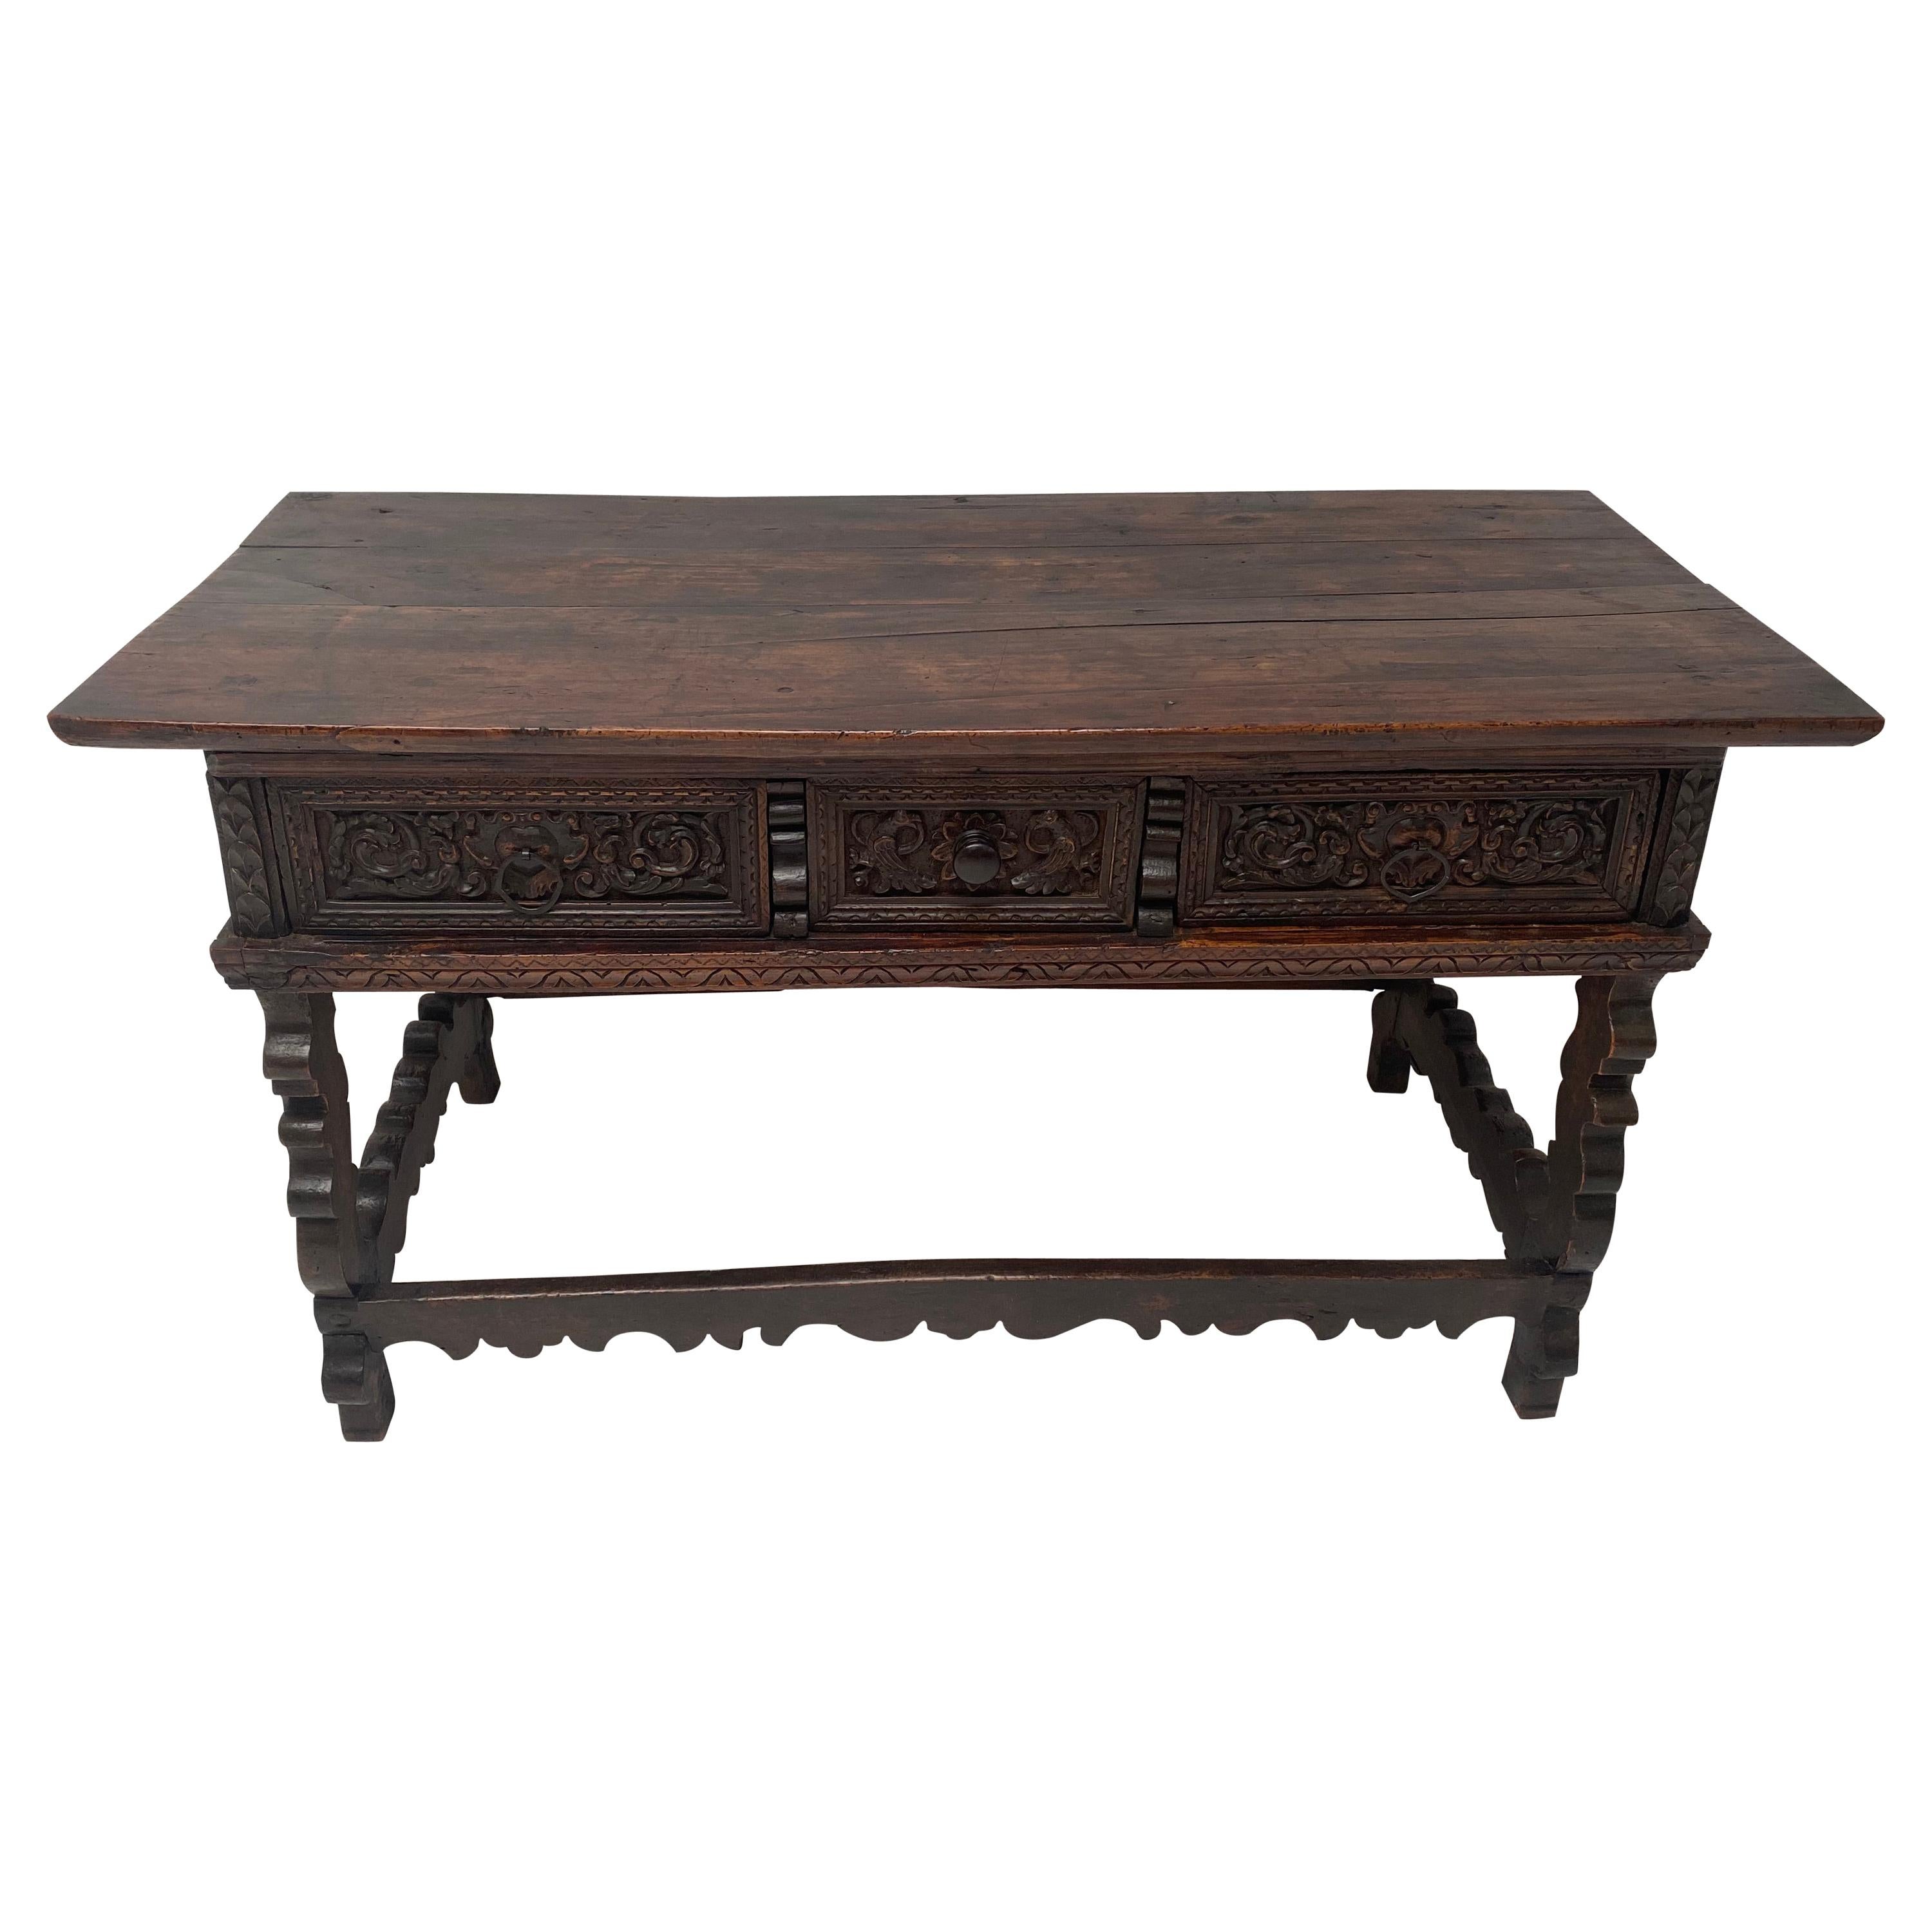 Antique Italian Walnut Table with 3 drawers, Tuscany, 17th Century